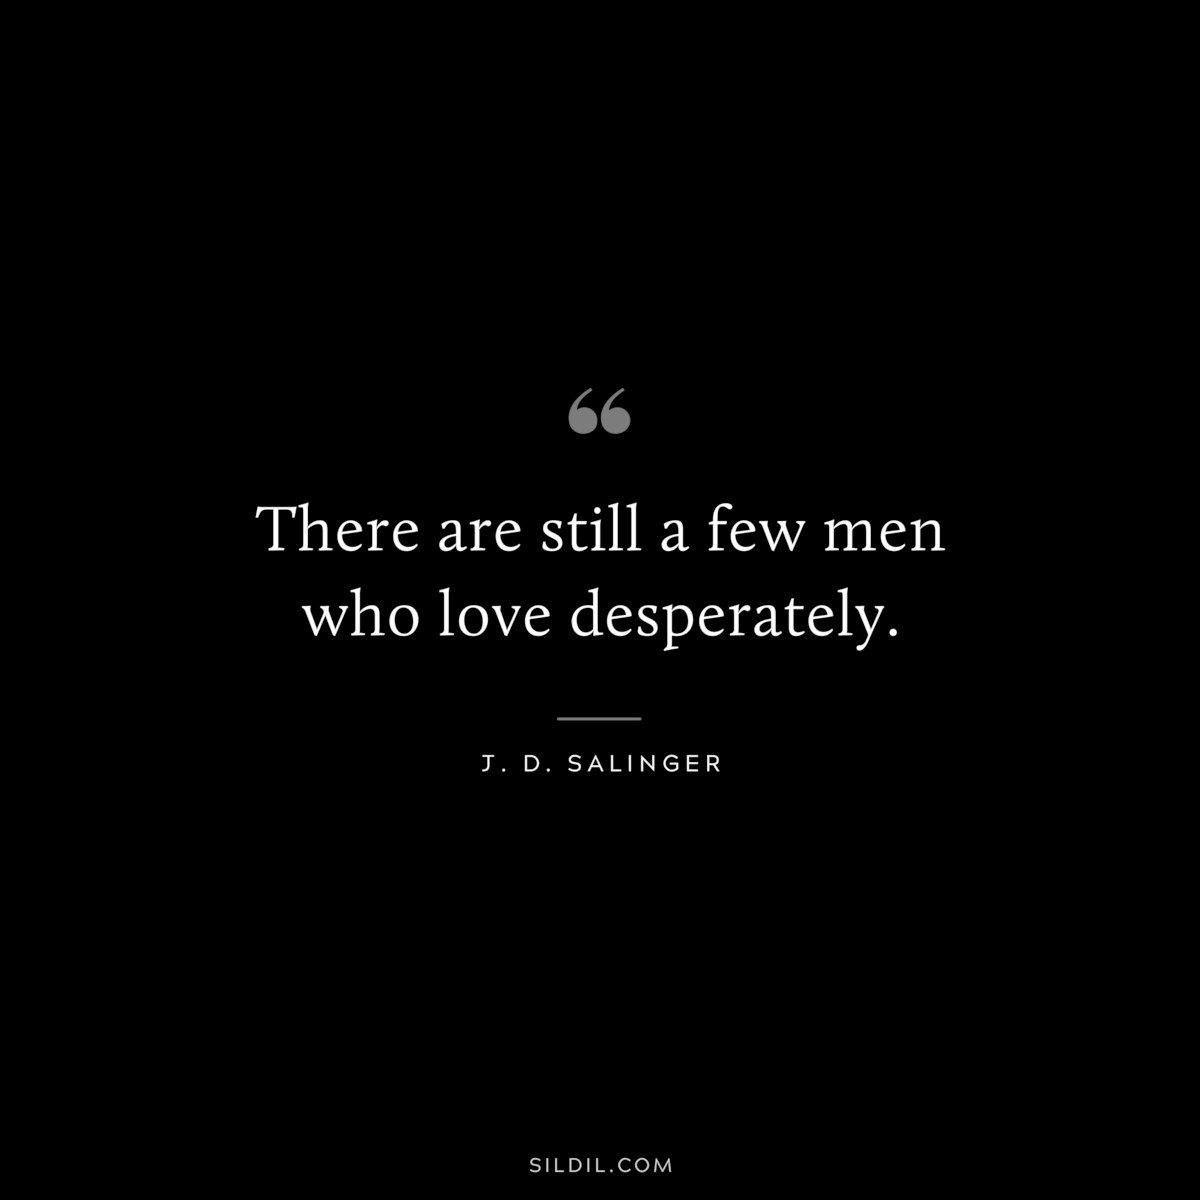 There are still a few men who love desperately. — J. D. Salinger